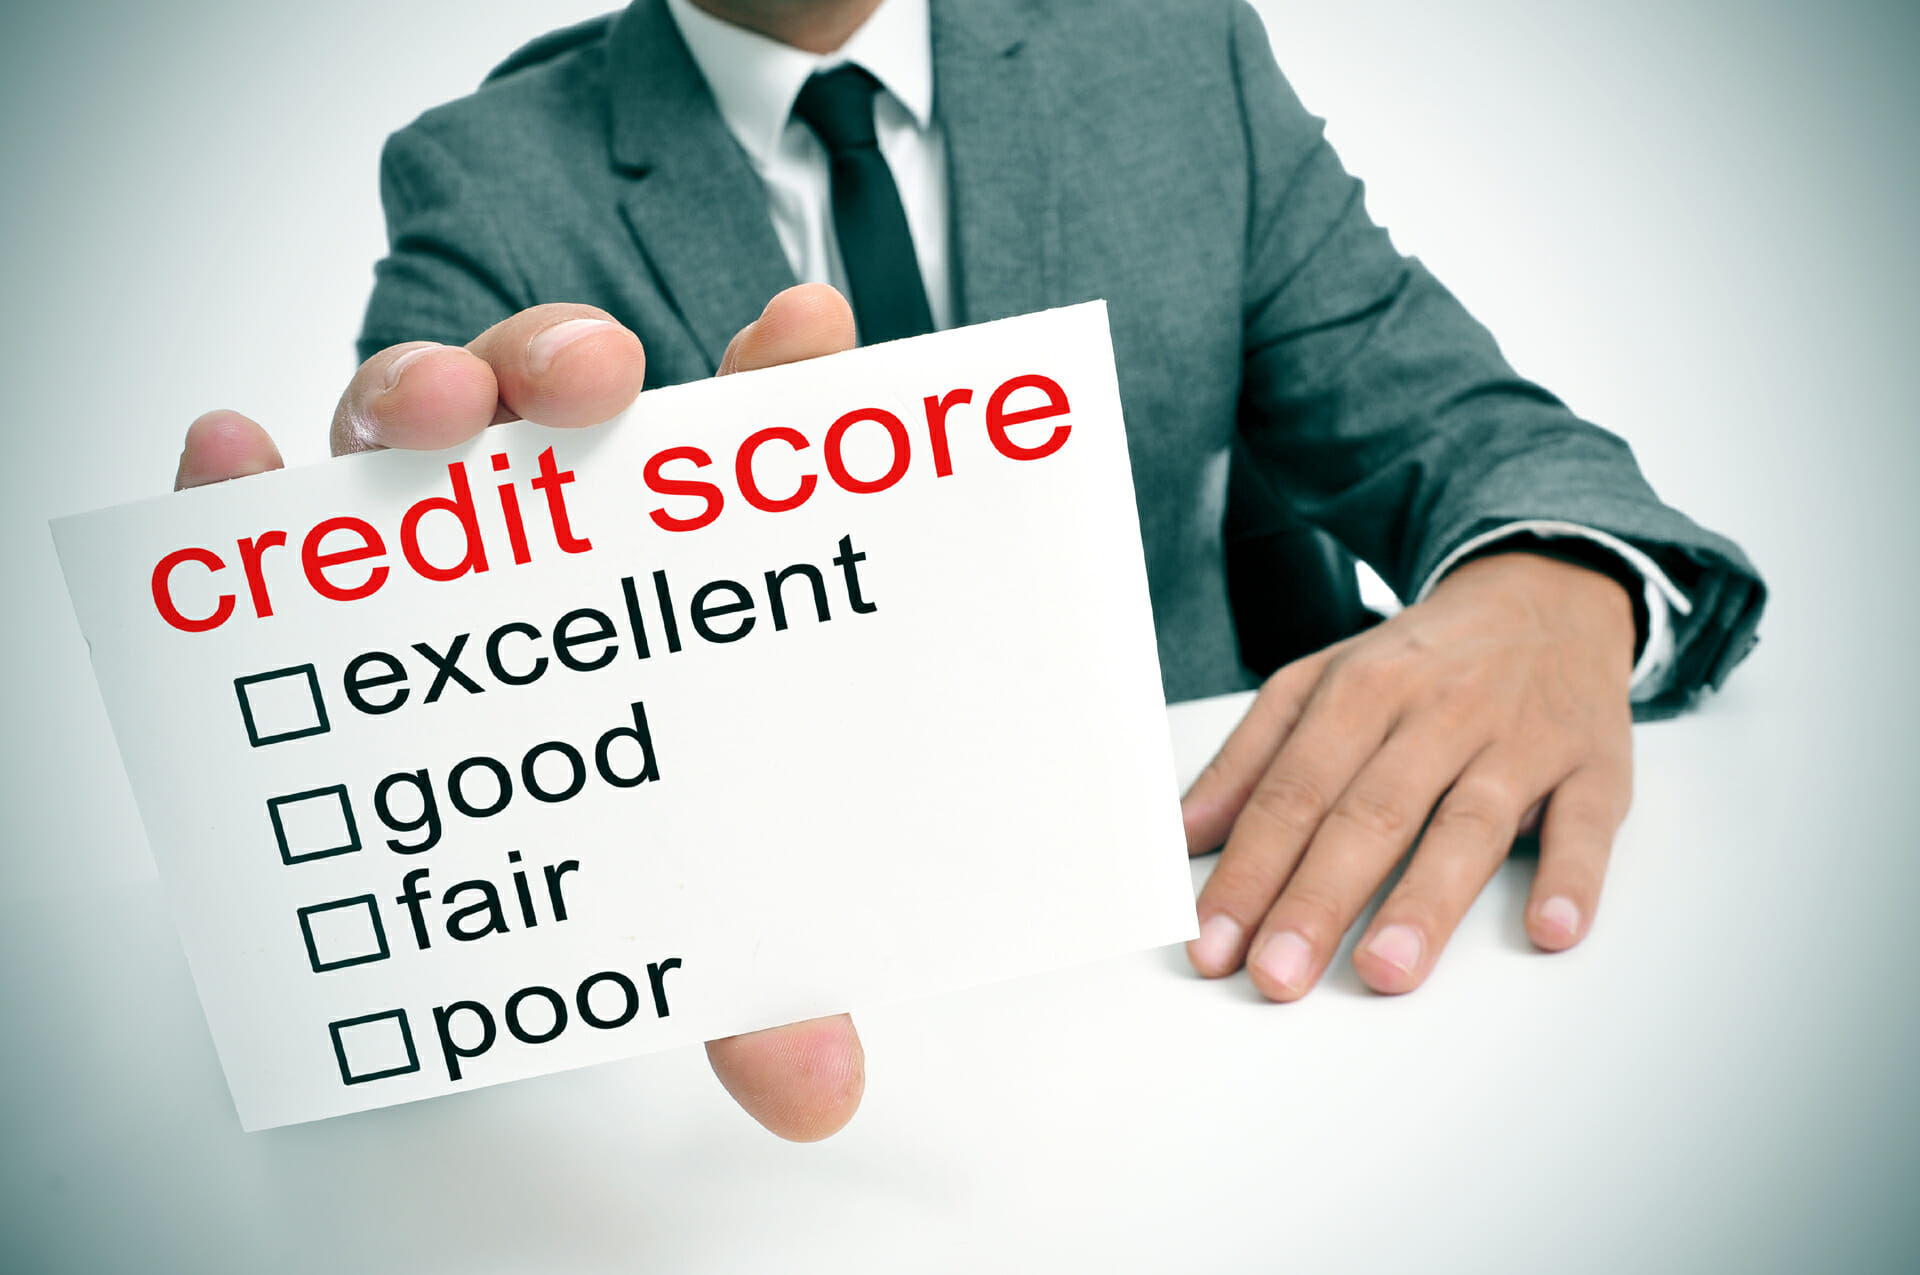 Credit score card held by a man